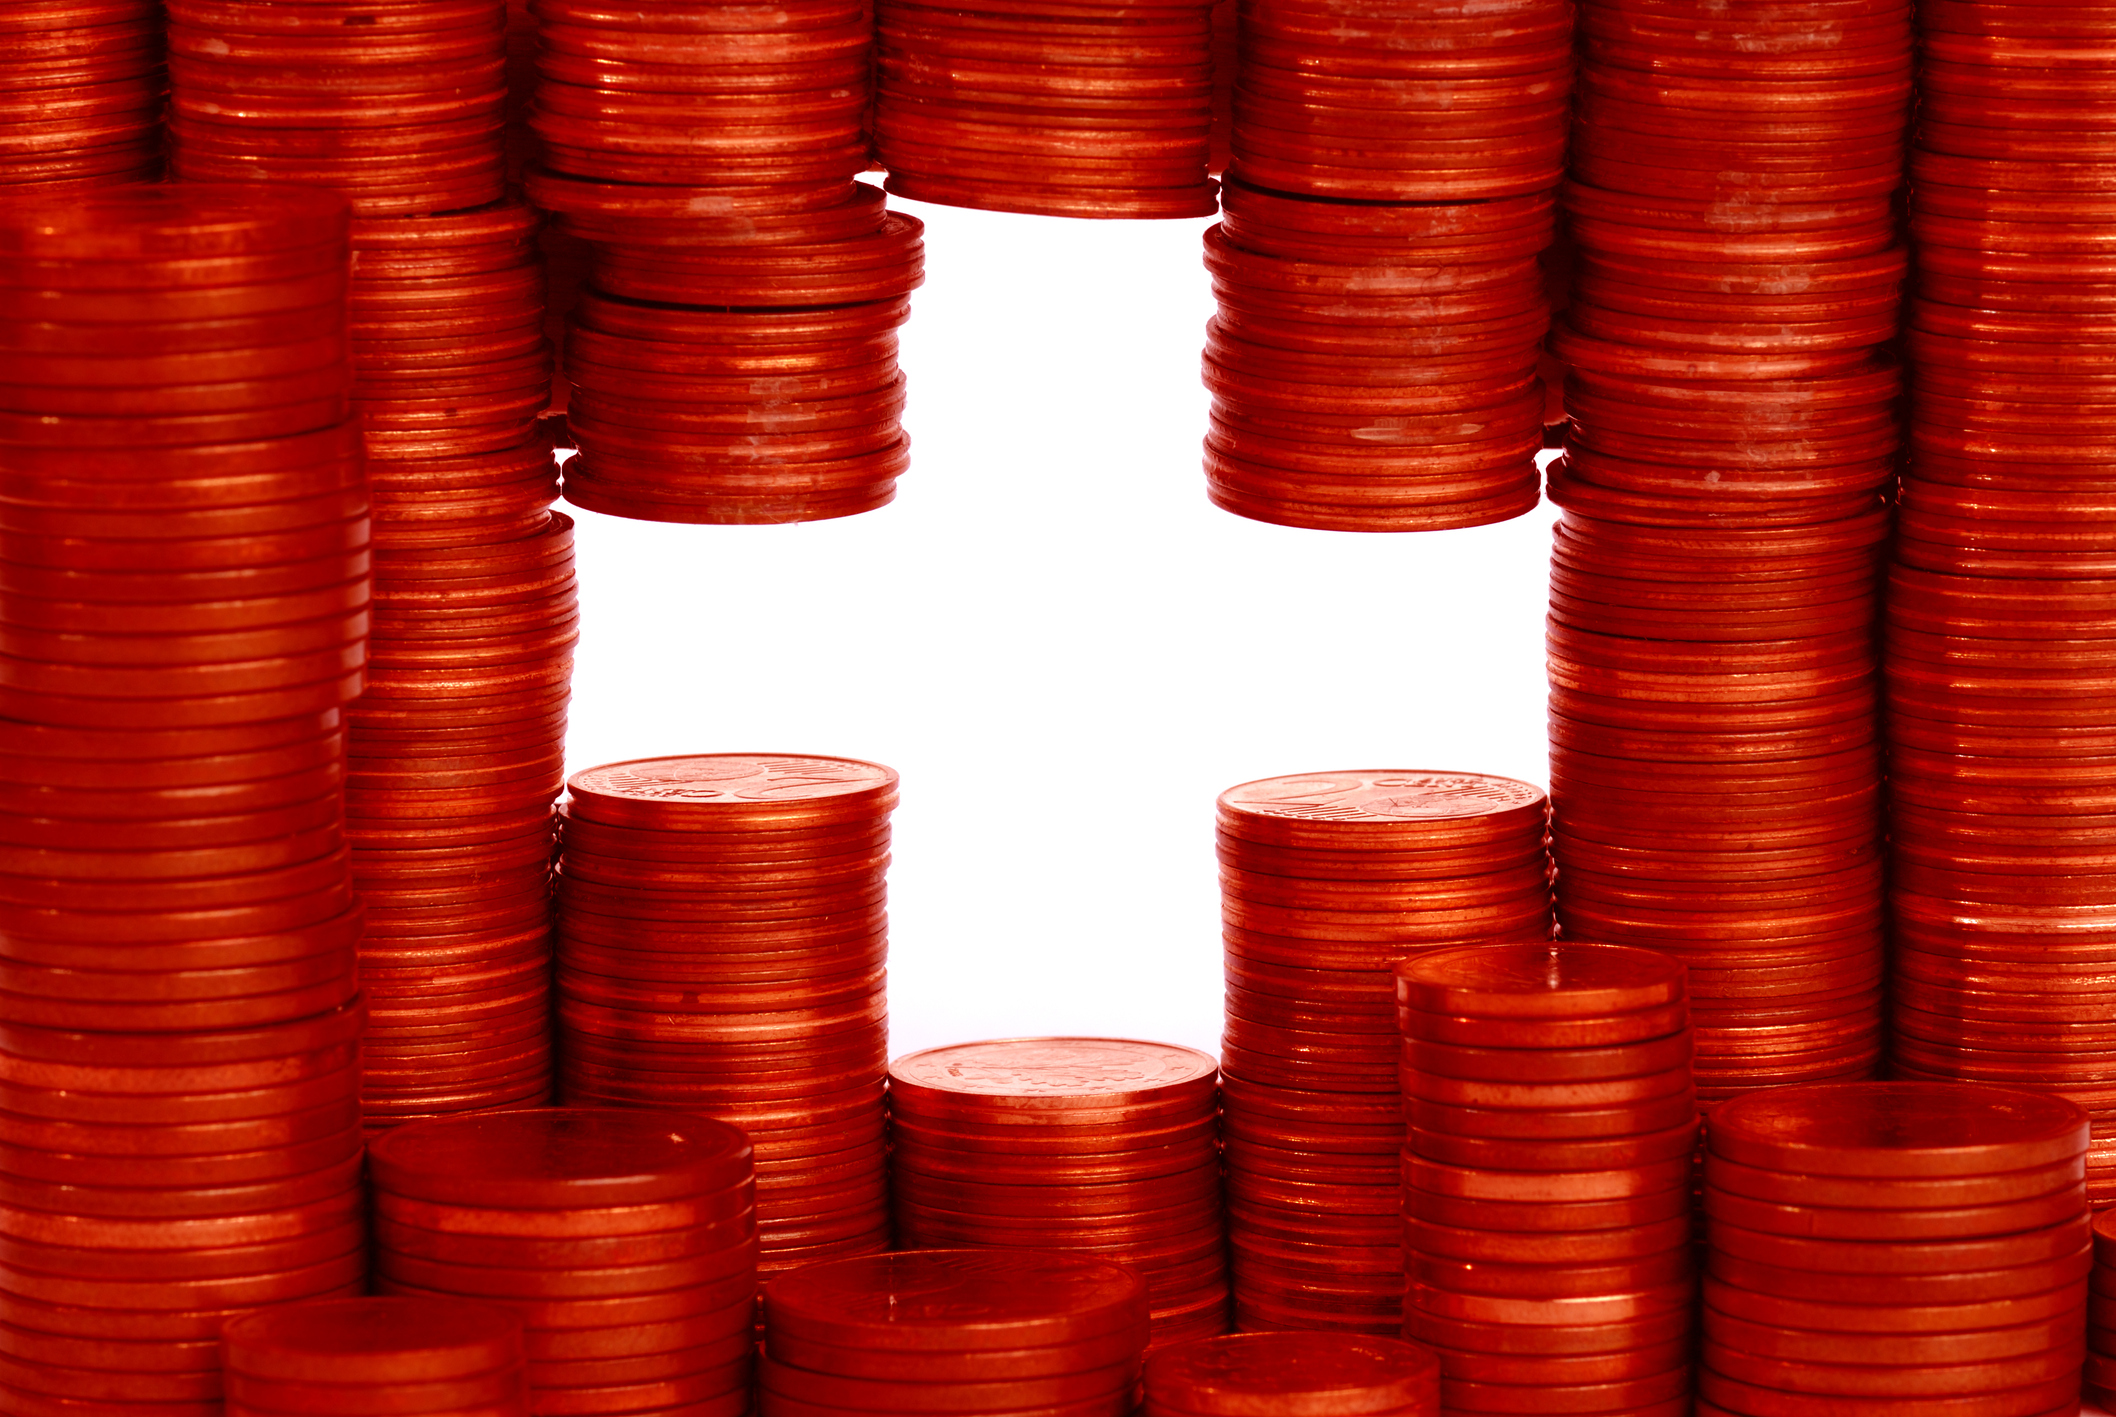 Swiss banking secrecy laws ‘not doomed yet’